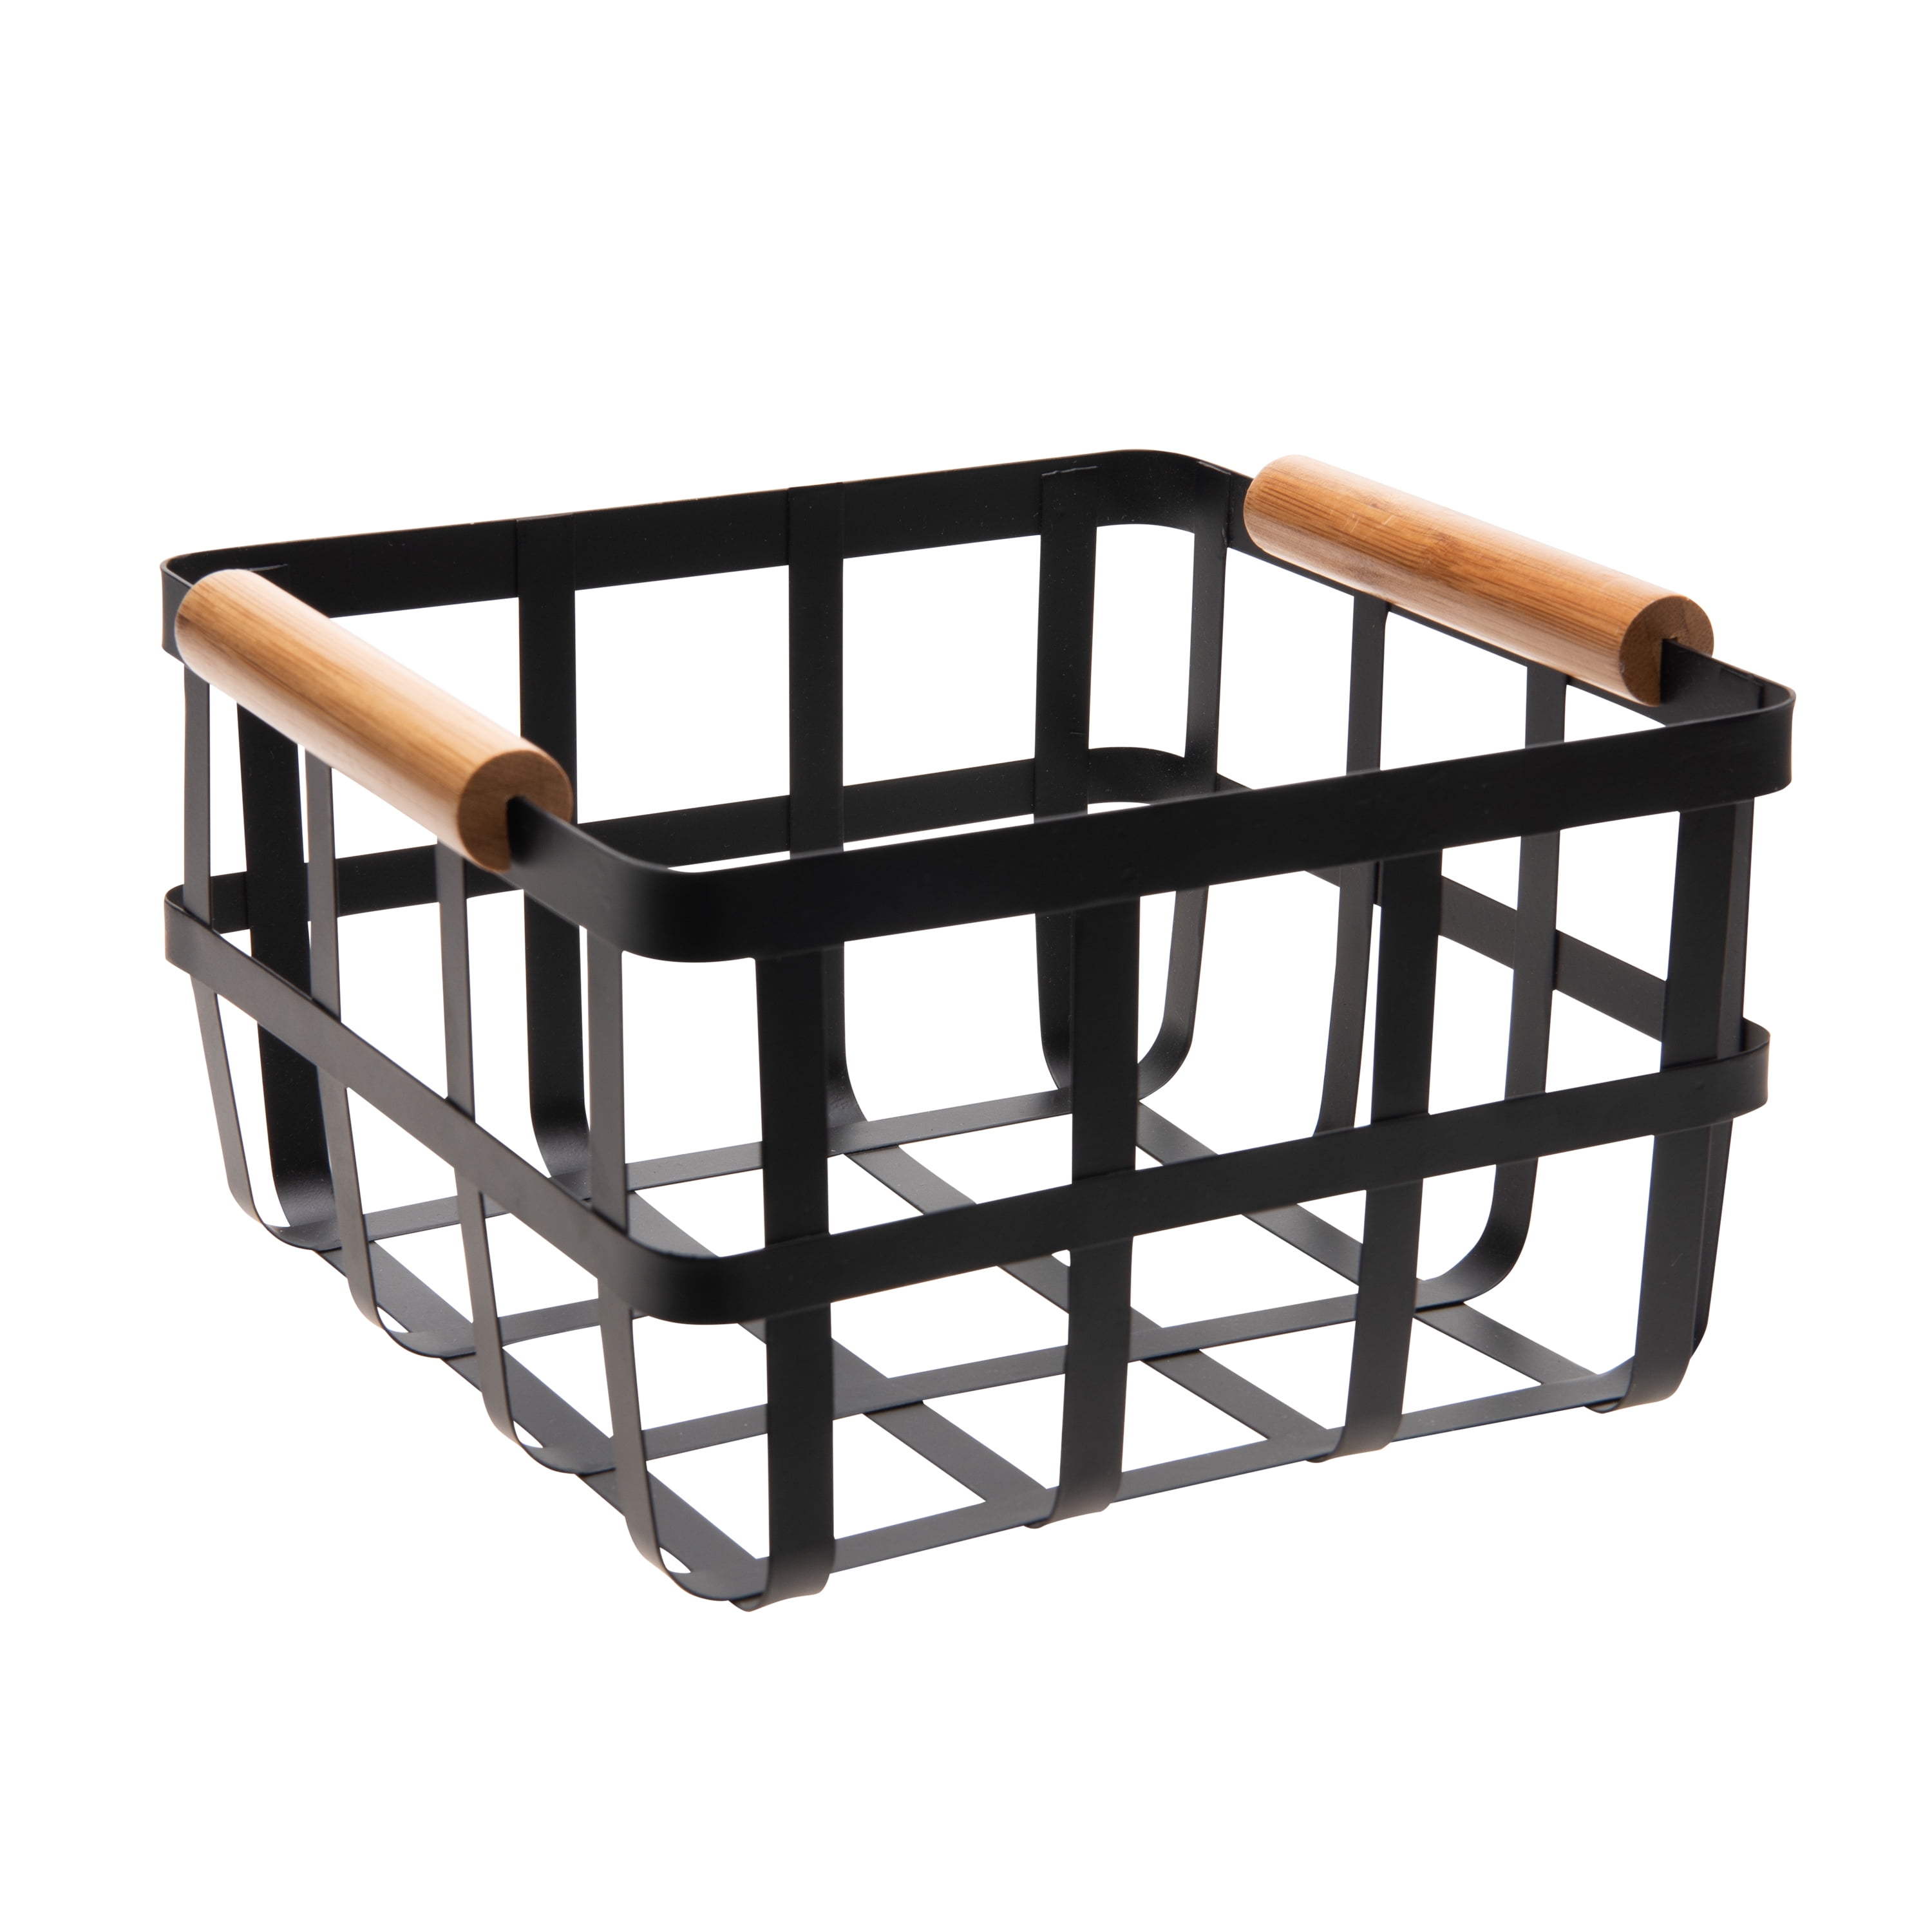 Simplify Square Metal Storage Basket with Bamboo Handles in Black